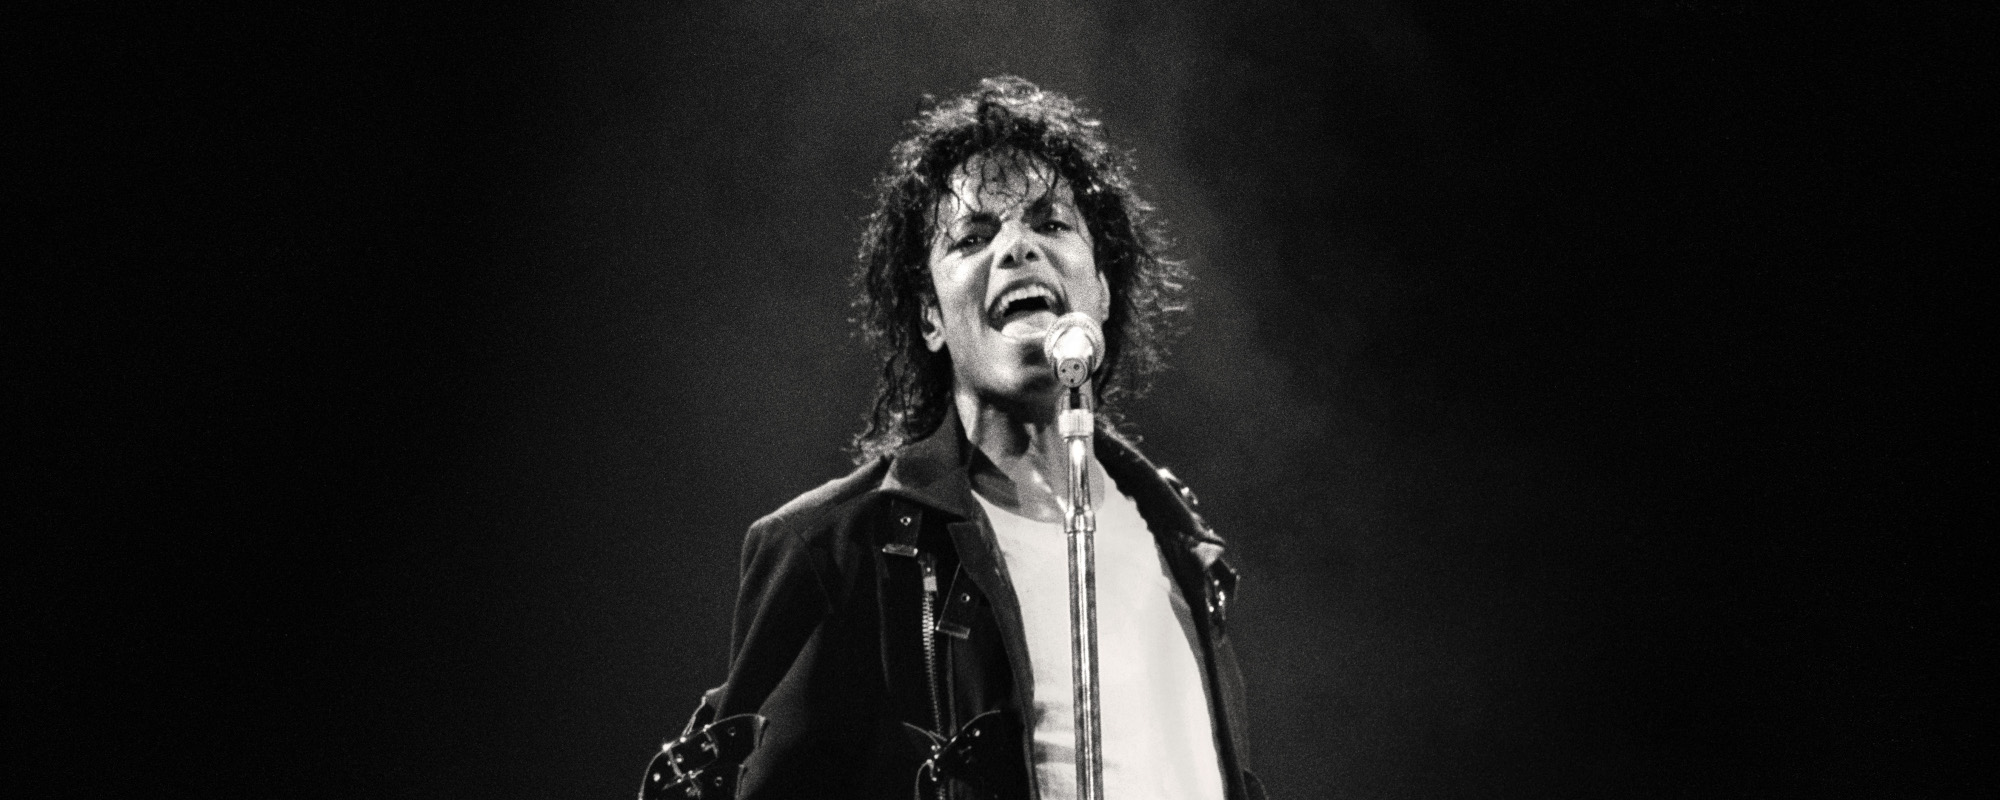 6 Songs You Didn’t Know Michael Jackson Wrote for The Jacksons